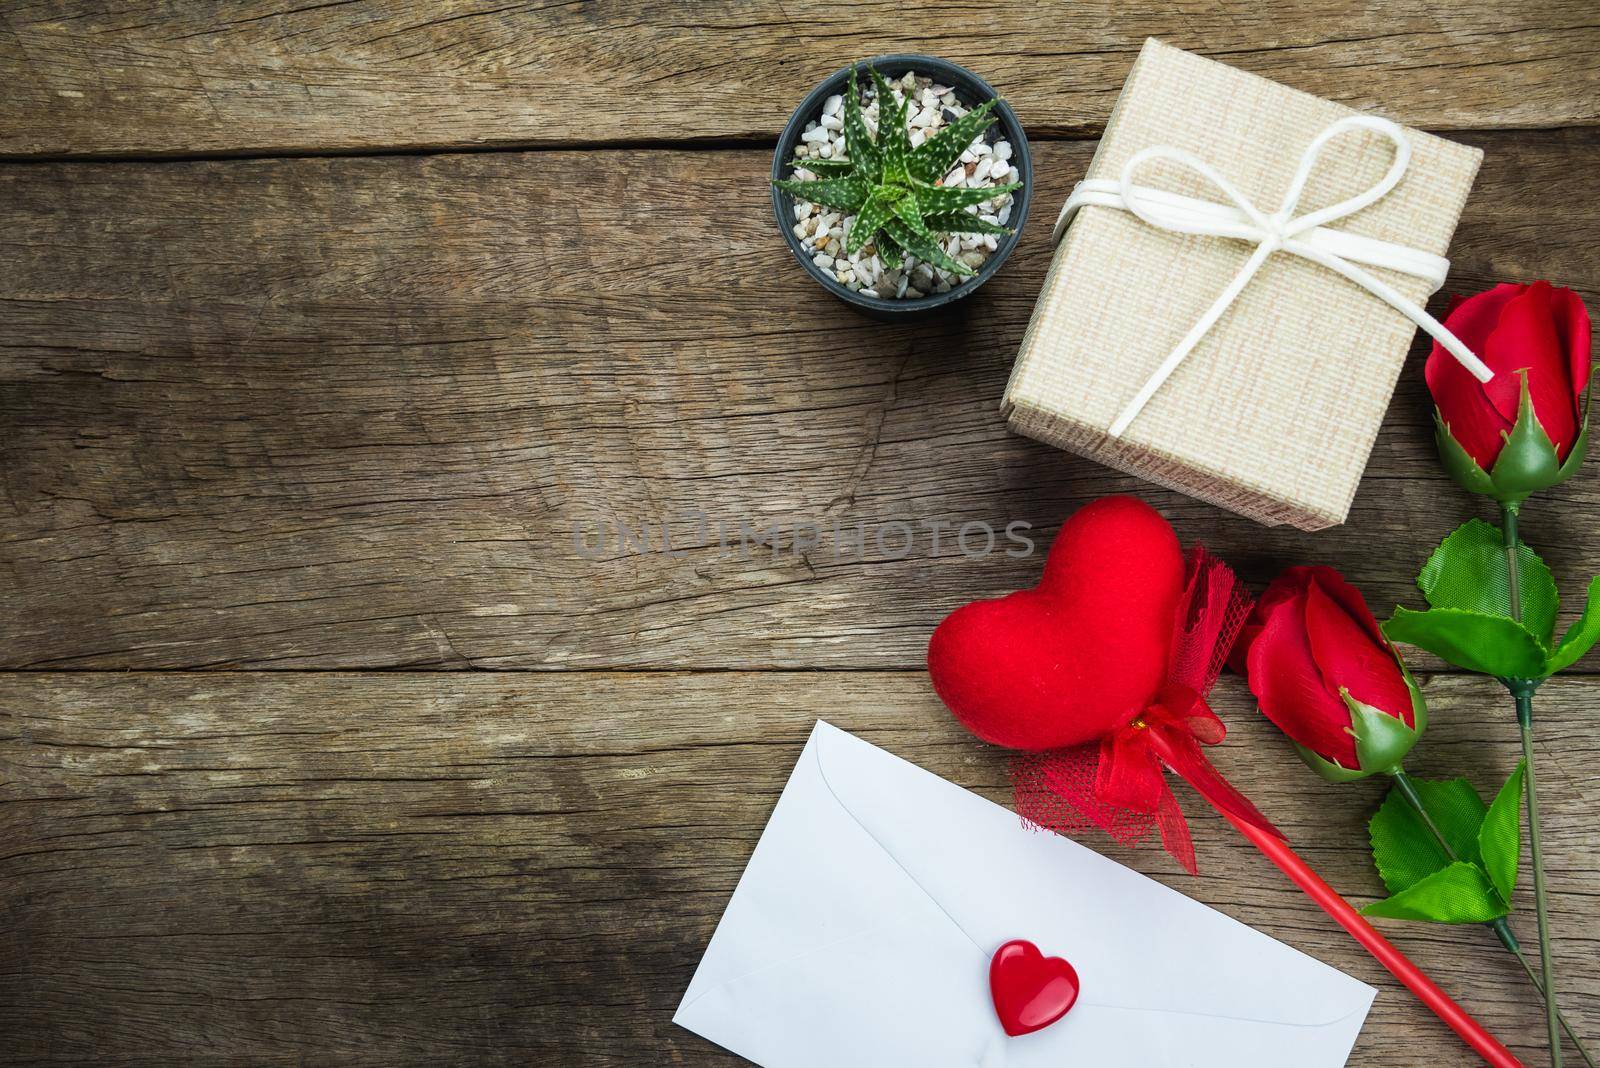 Red rose with message card.Image of Valentines day